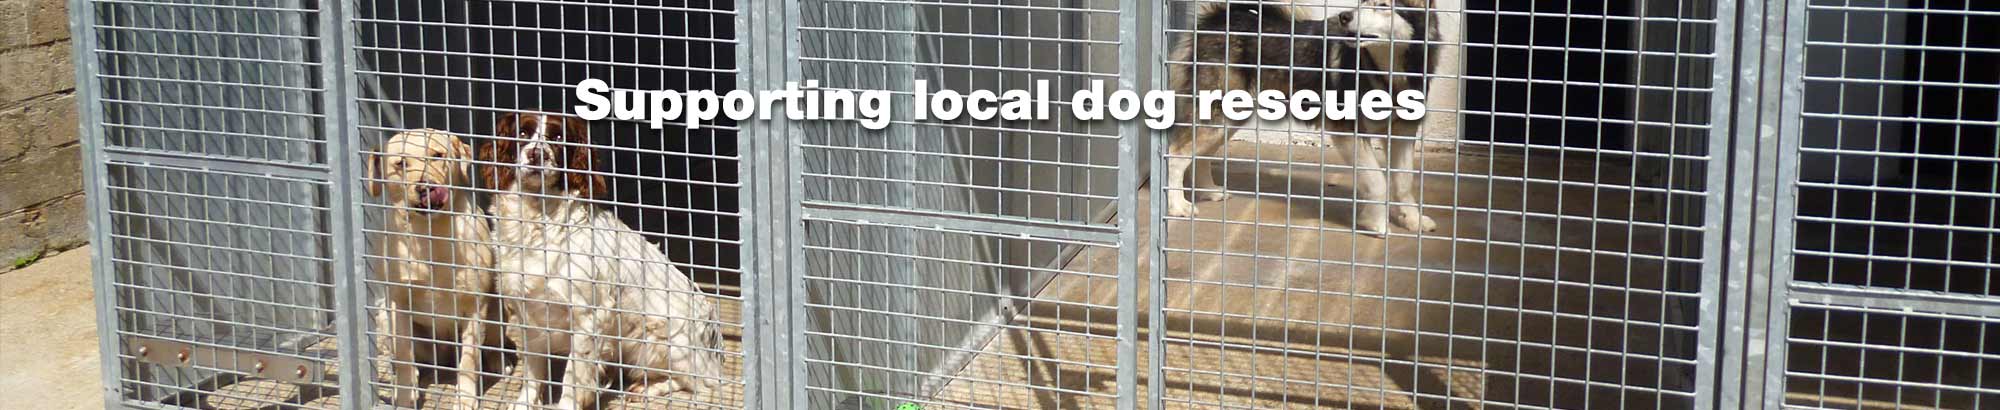 Support your local dog rescue centres Essex Dogs